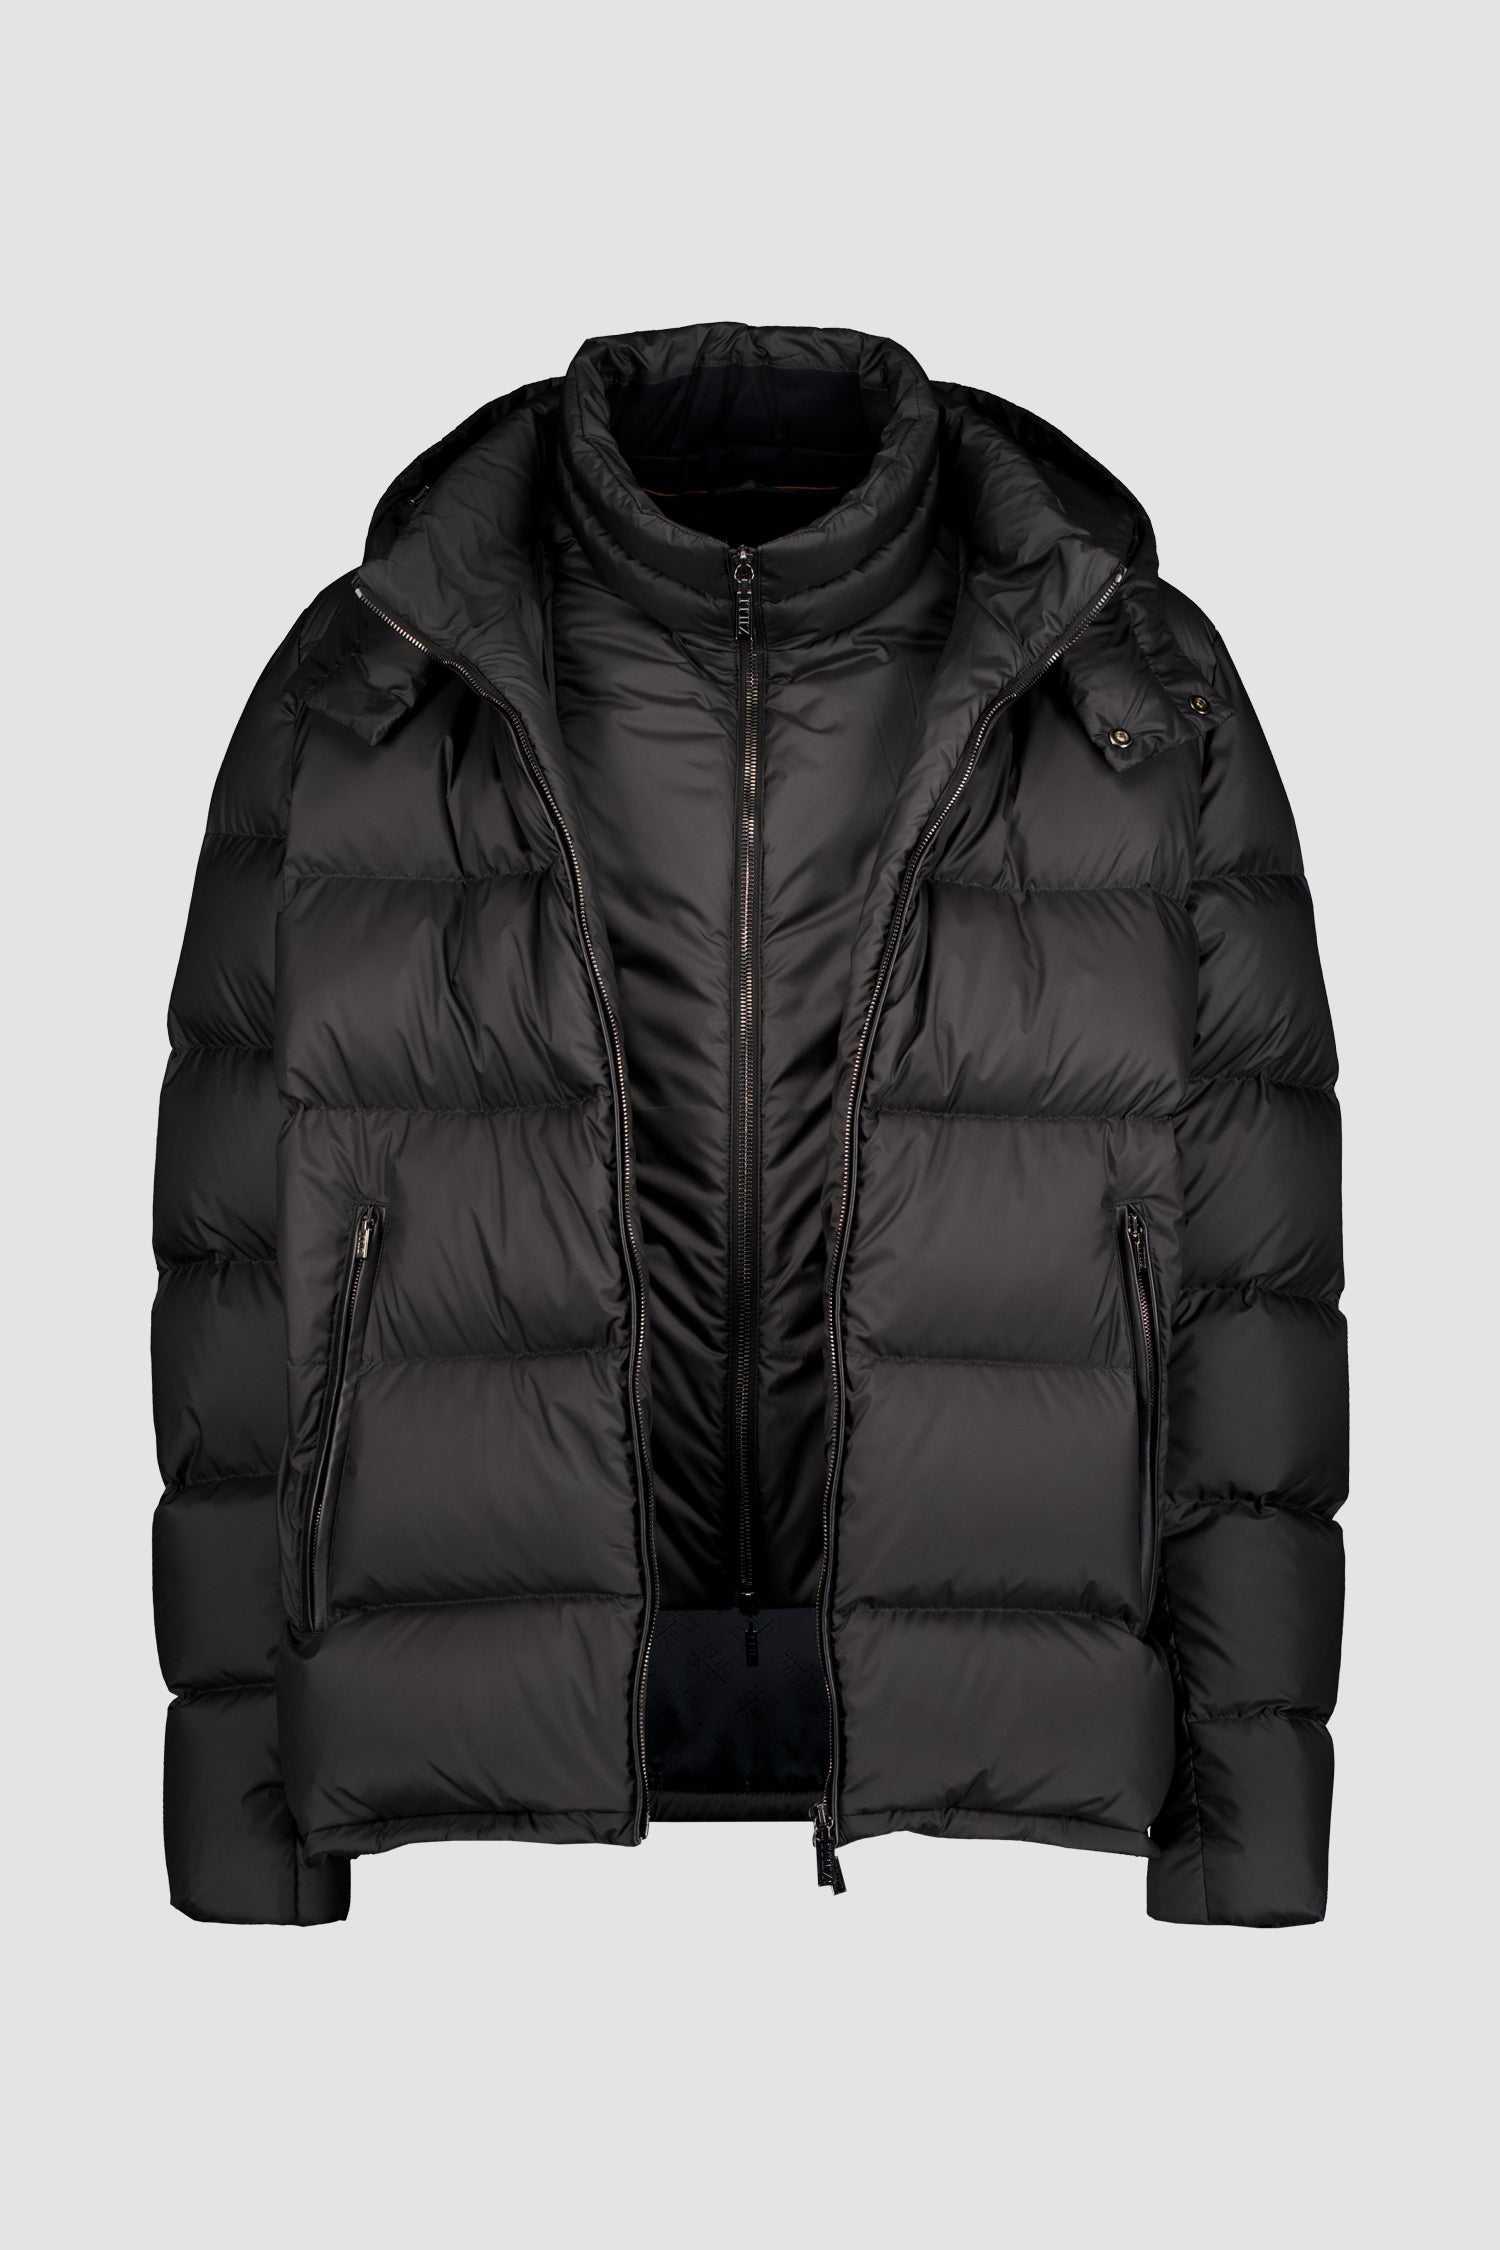 Zilli Black Down Short Jacket with Removable Hood